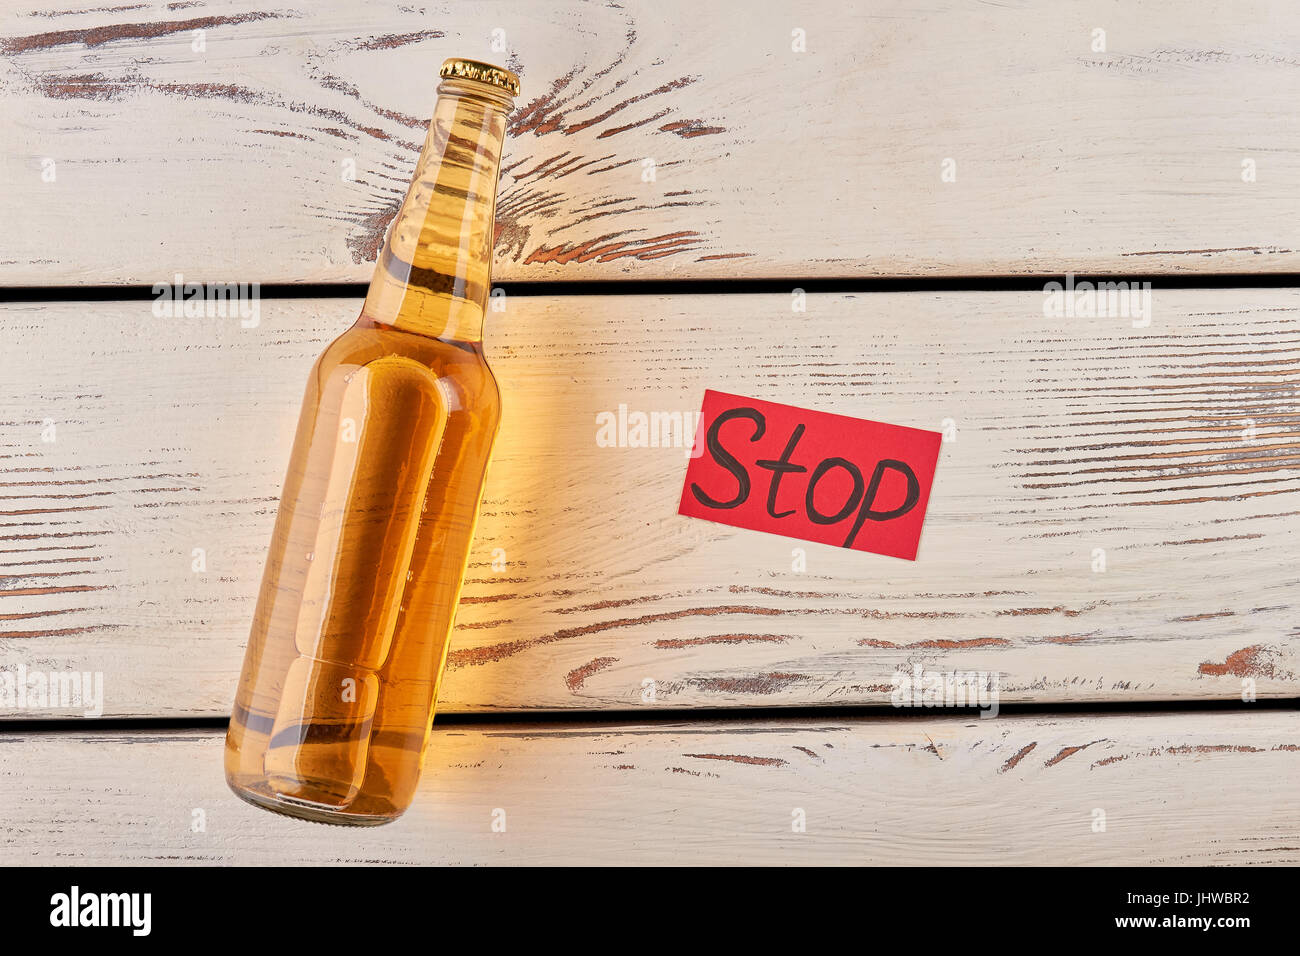 Hopelessness is not reason to drink. Stock Photo